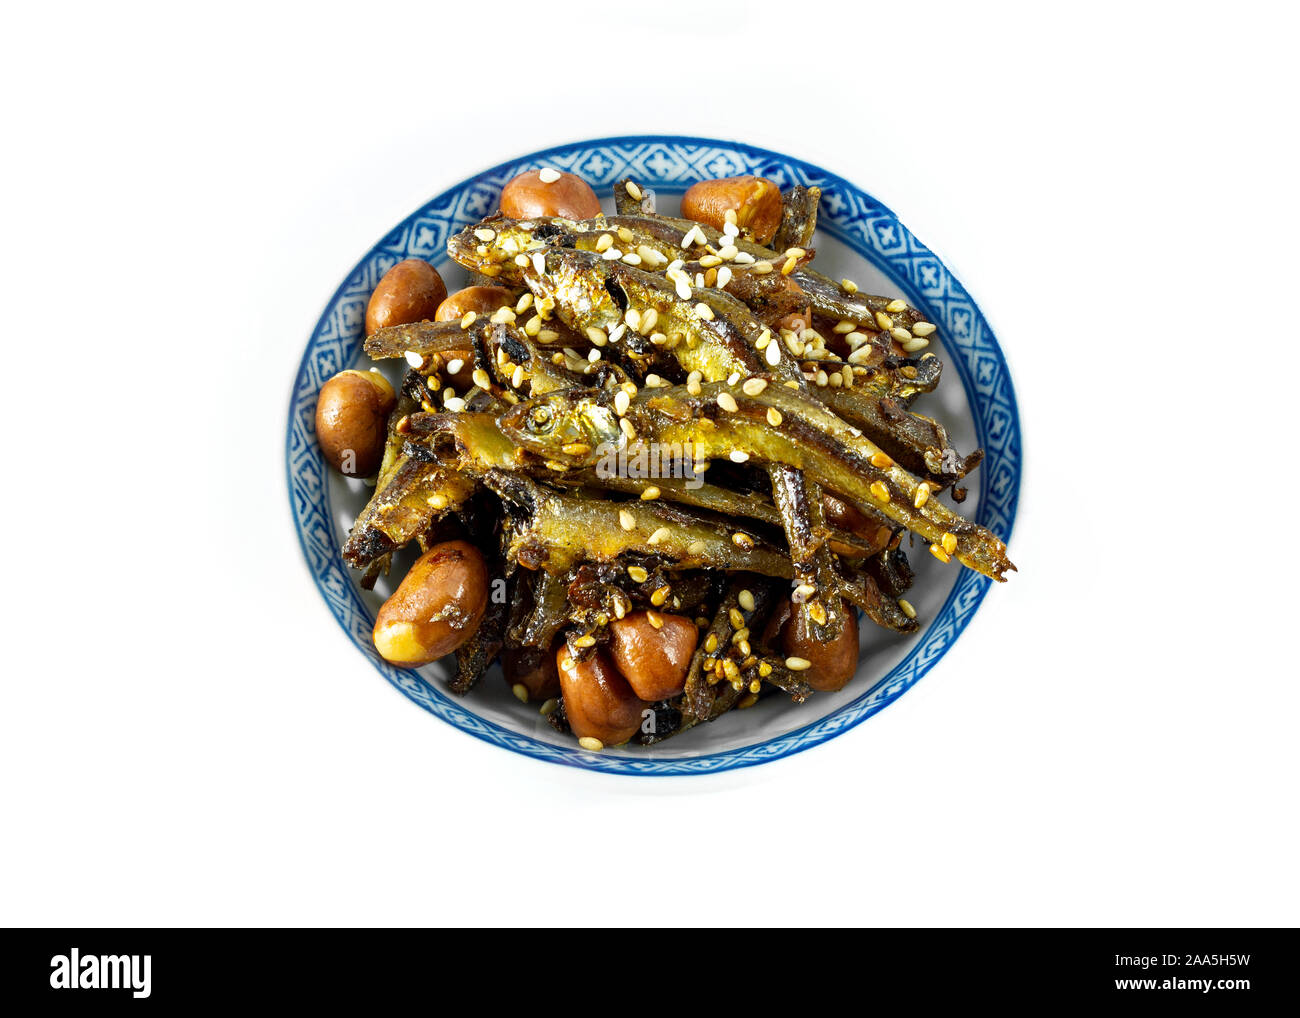 Tazukuri, candied sardines in a dish. Dried sardines lightly coated with honey, roasted sesame and peanuts. Stock Photo